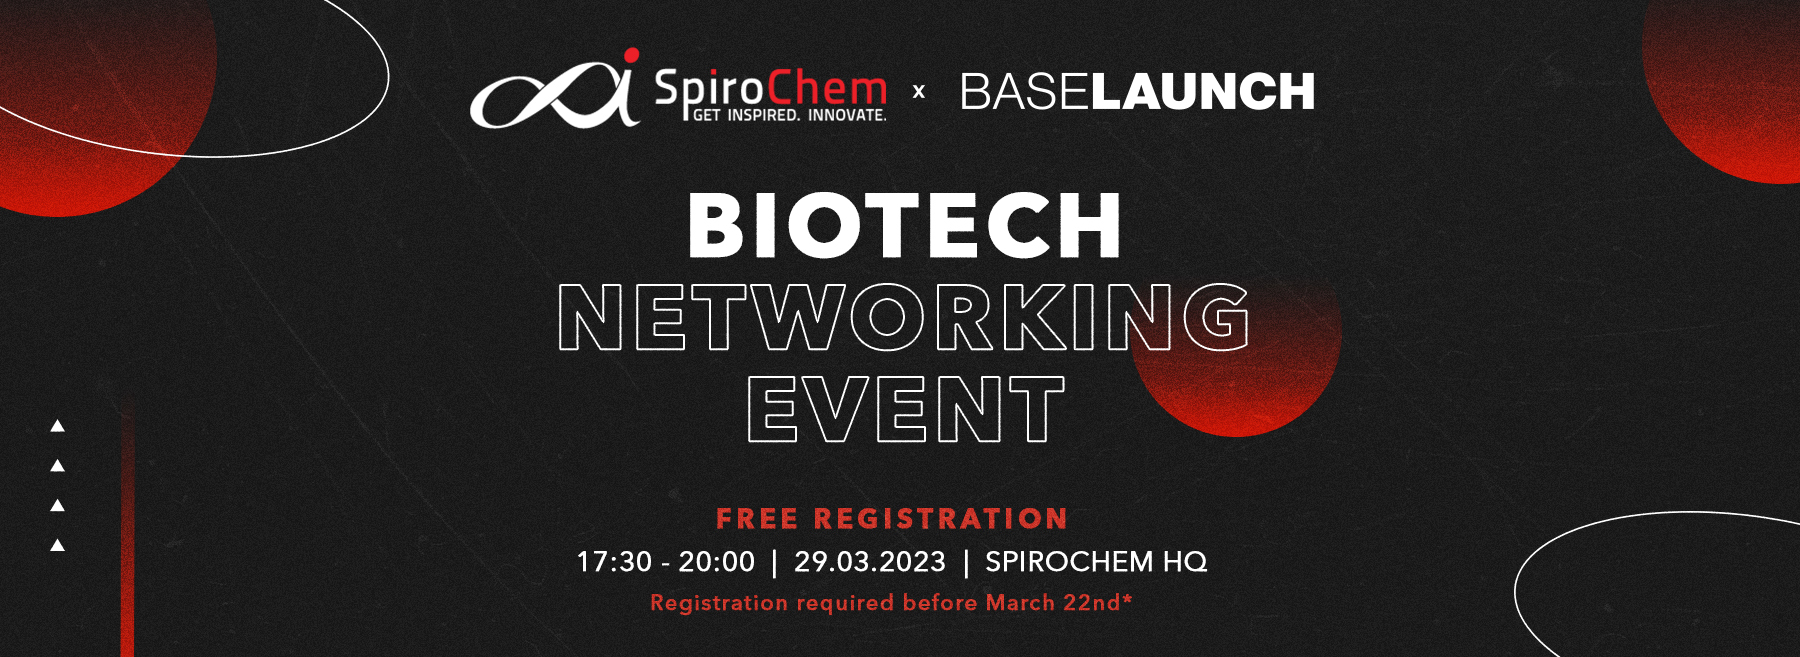 Biotech Networking Event at SpiroChem's facilities (in collaboration with BaseLaunch)